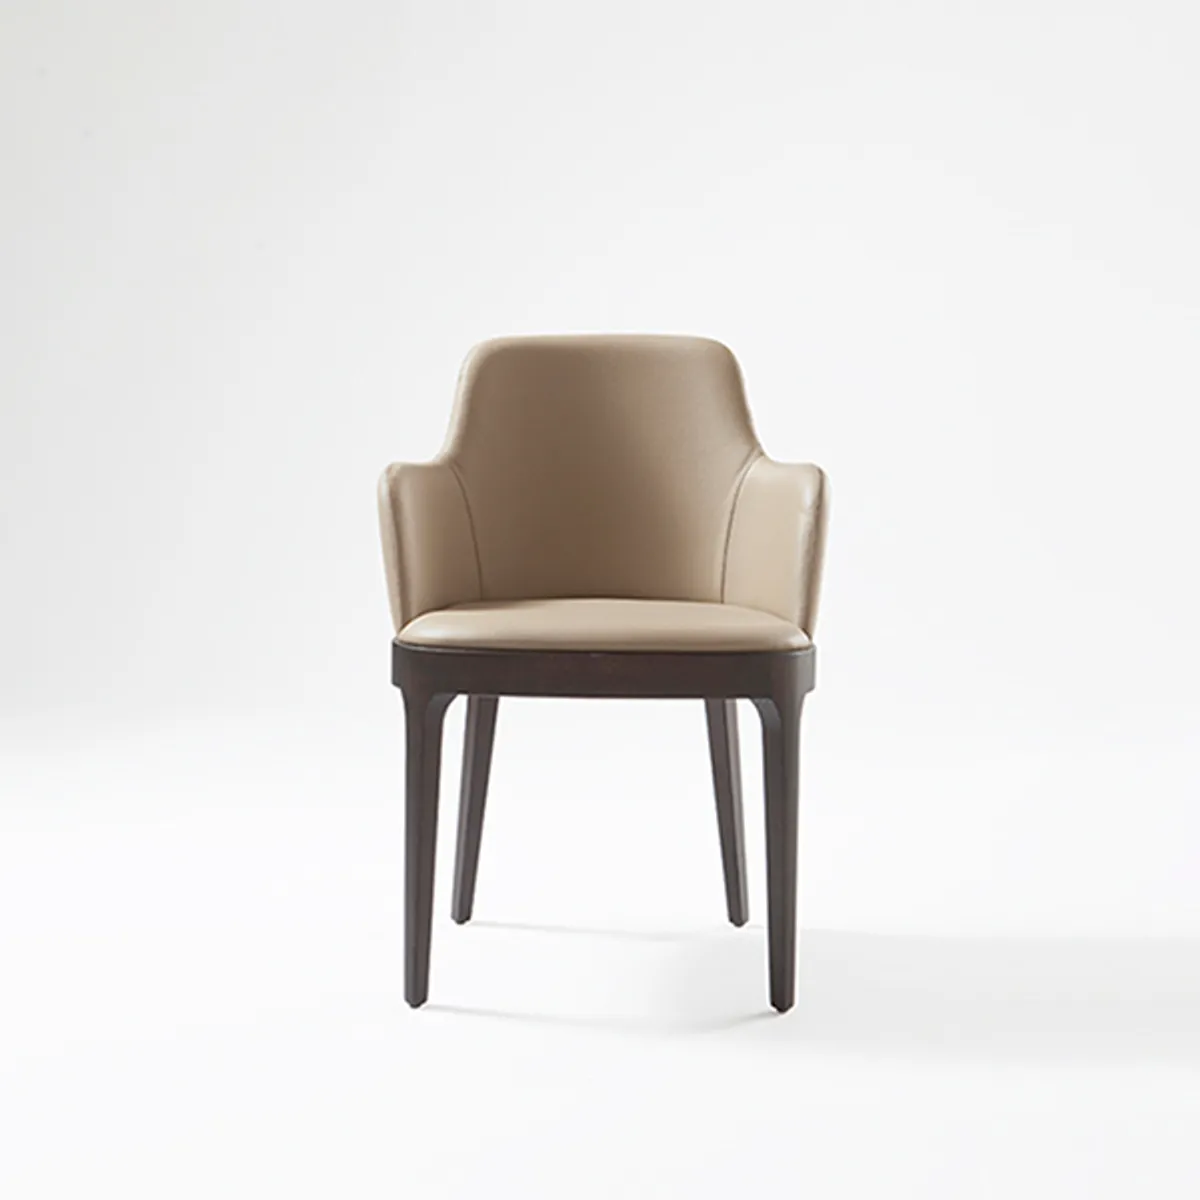 Candor Side Chair 3255 Inside Out Contracts